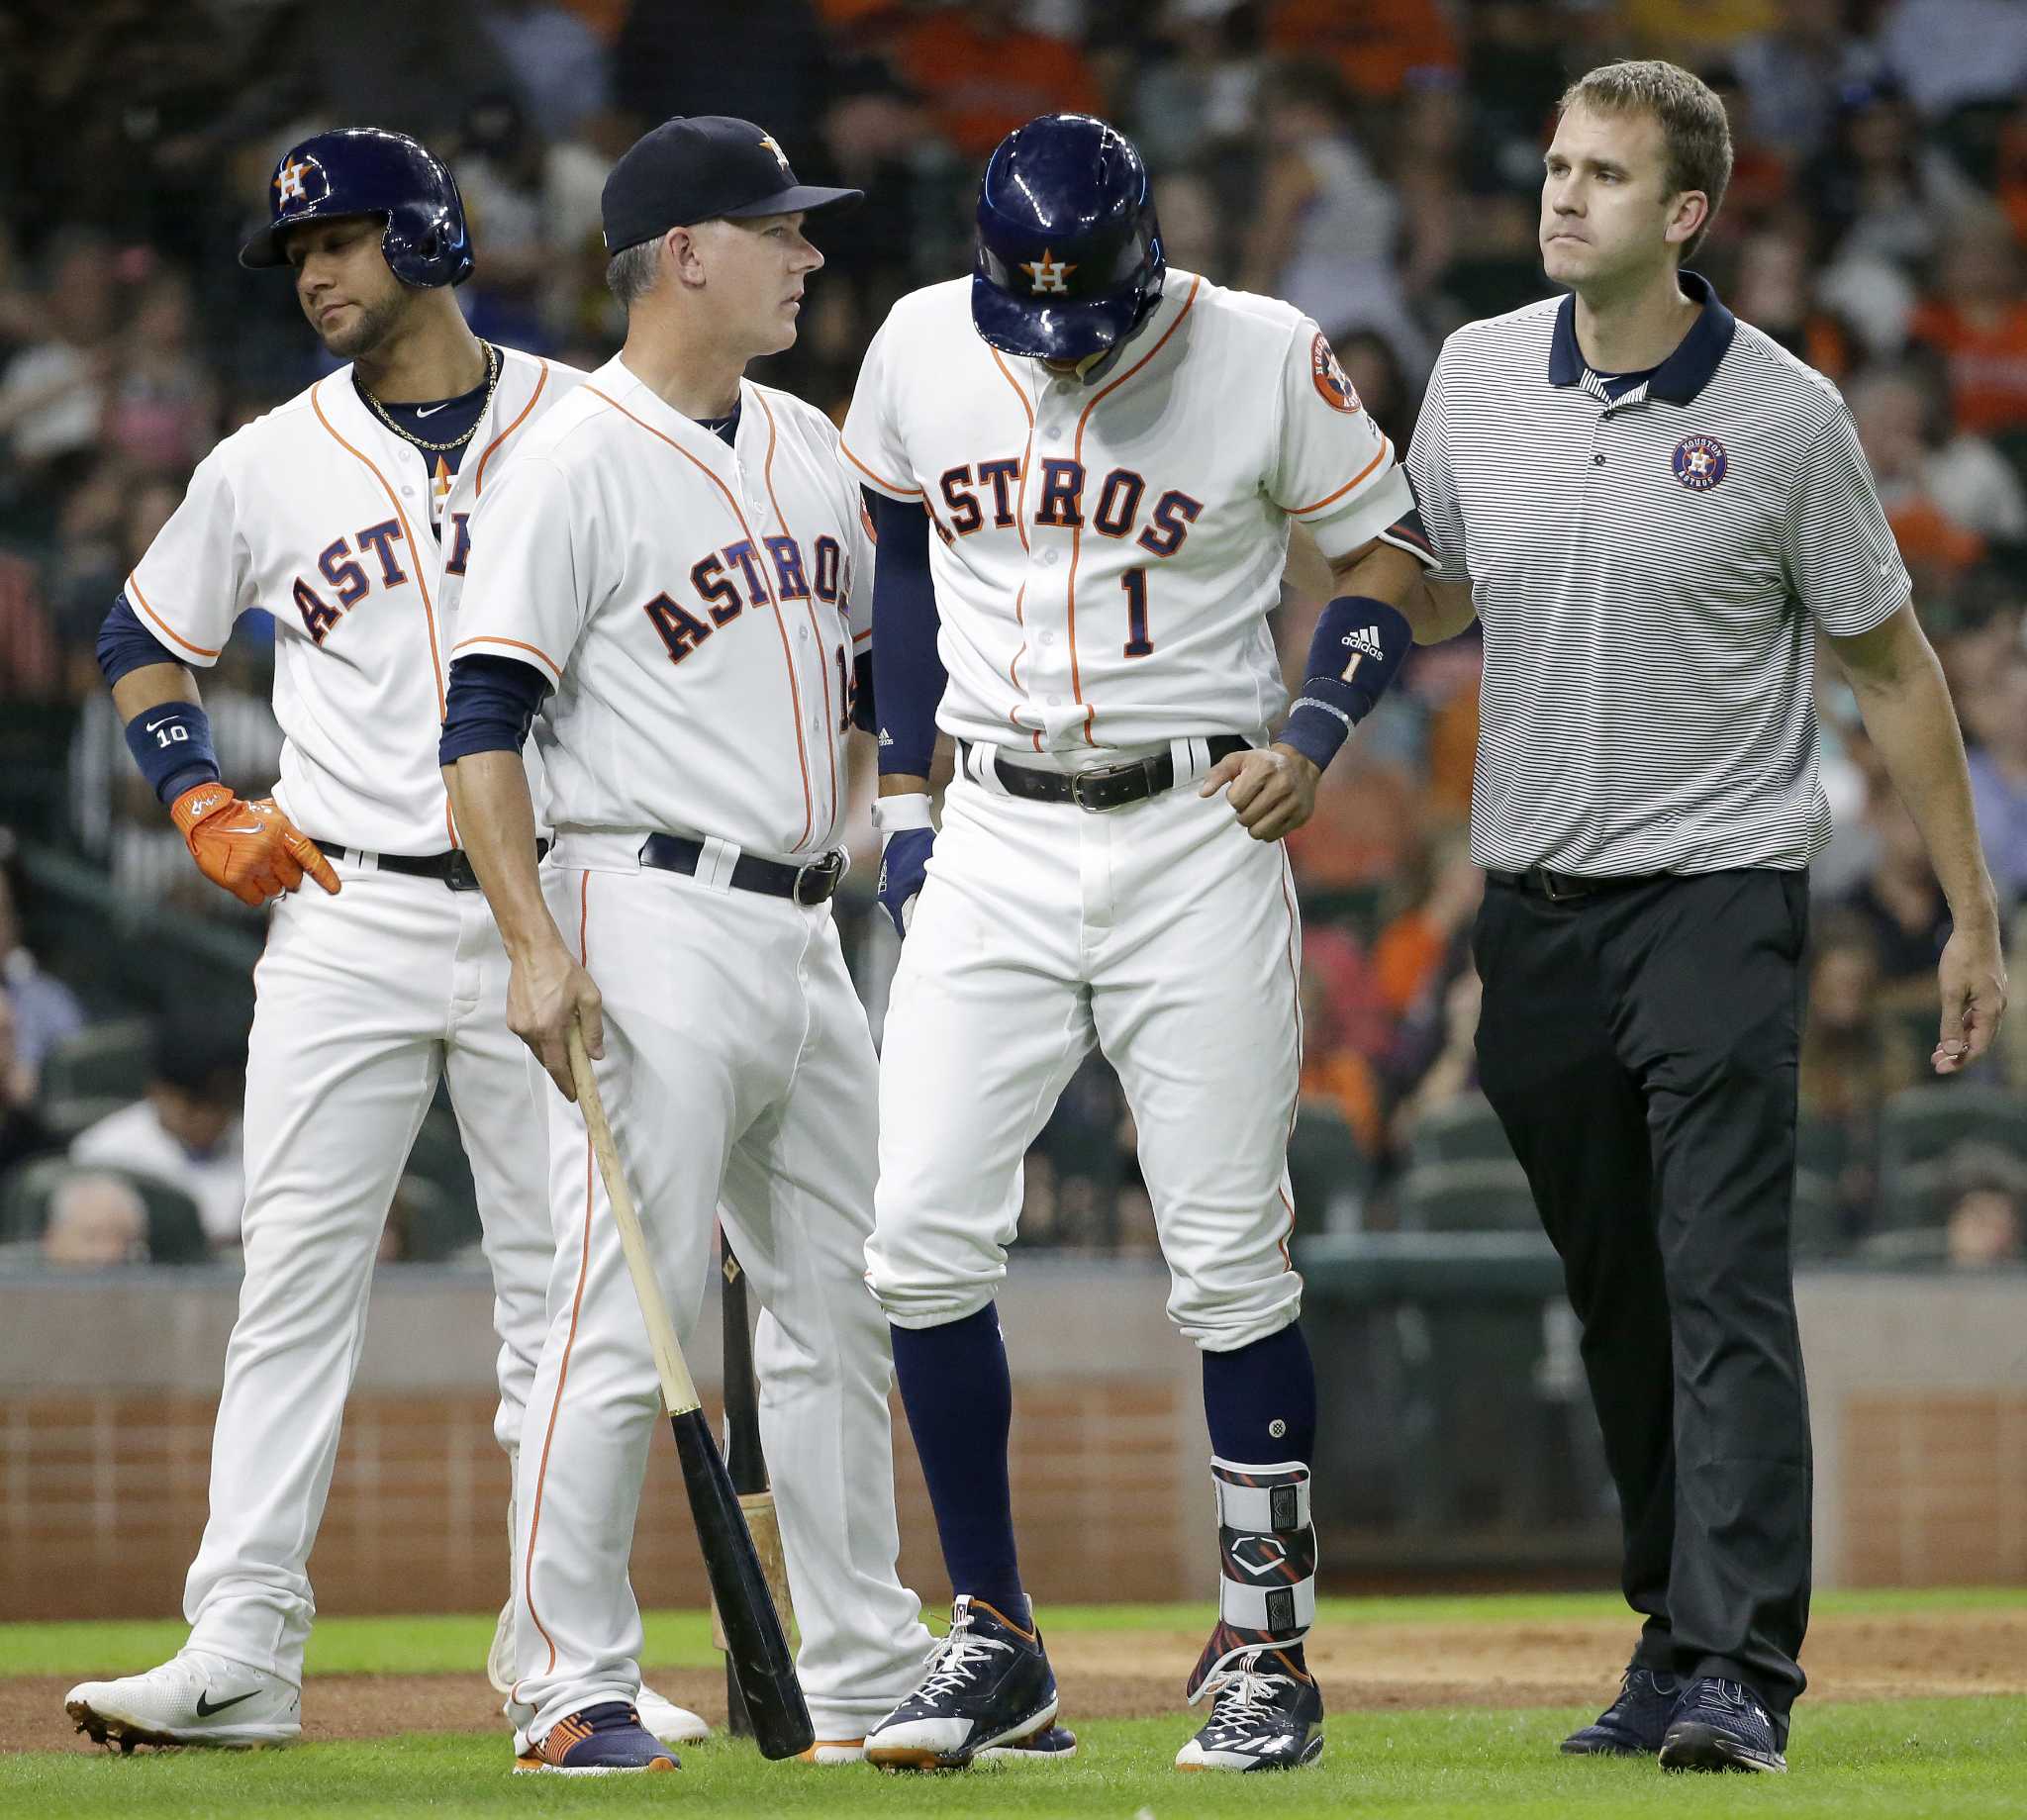 Are the Astros prepared to let Carlos Correa go? - The Crawfish Boxes